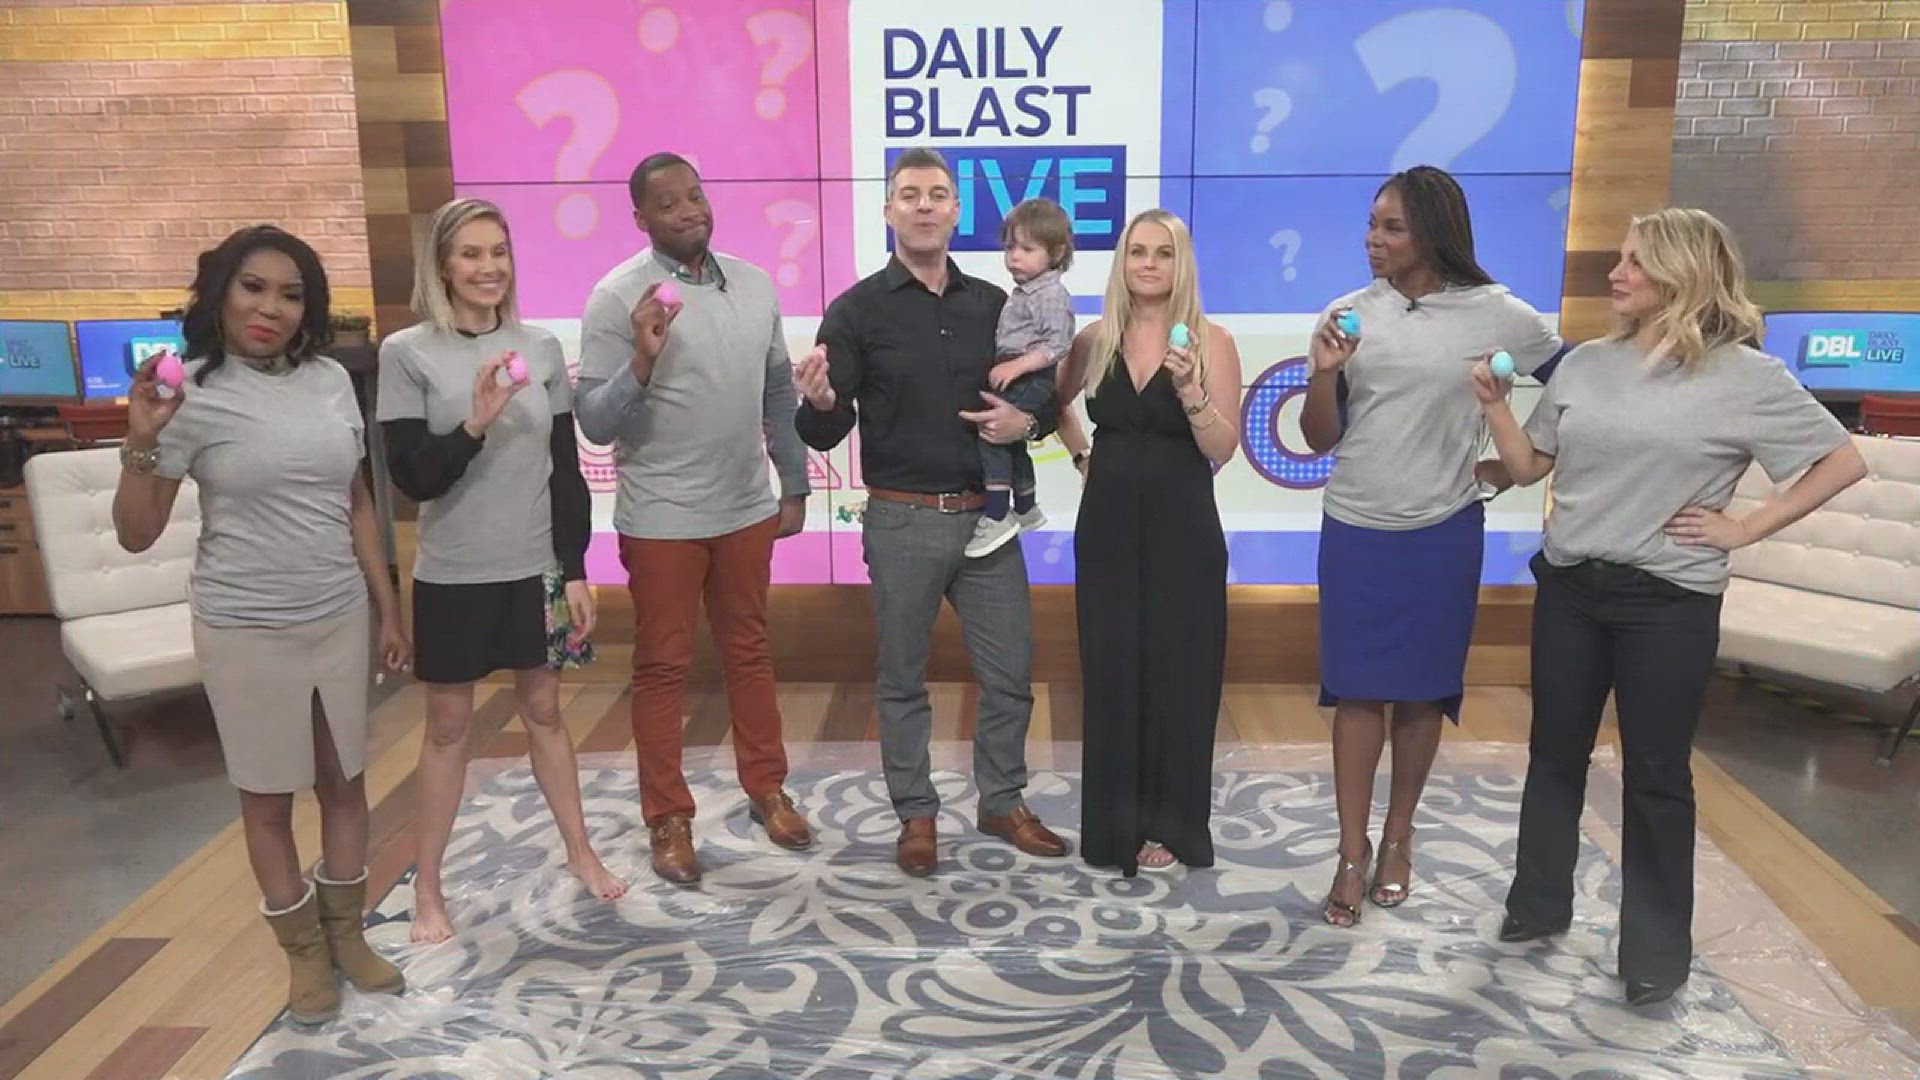 Looks like the 'Big Brother' household is turning into a boy's club! Daily Blast LIVE co-host Jeff Schroeder and his wife, and winner of CBS' "Big Brother" Jordan Lloyd, are expecting another baby boy. Joined by their first born Lawson and Daily Blast LIV